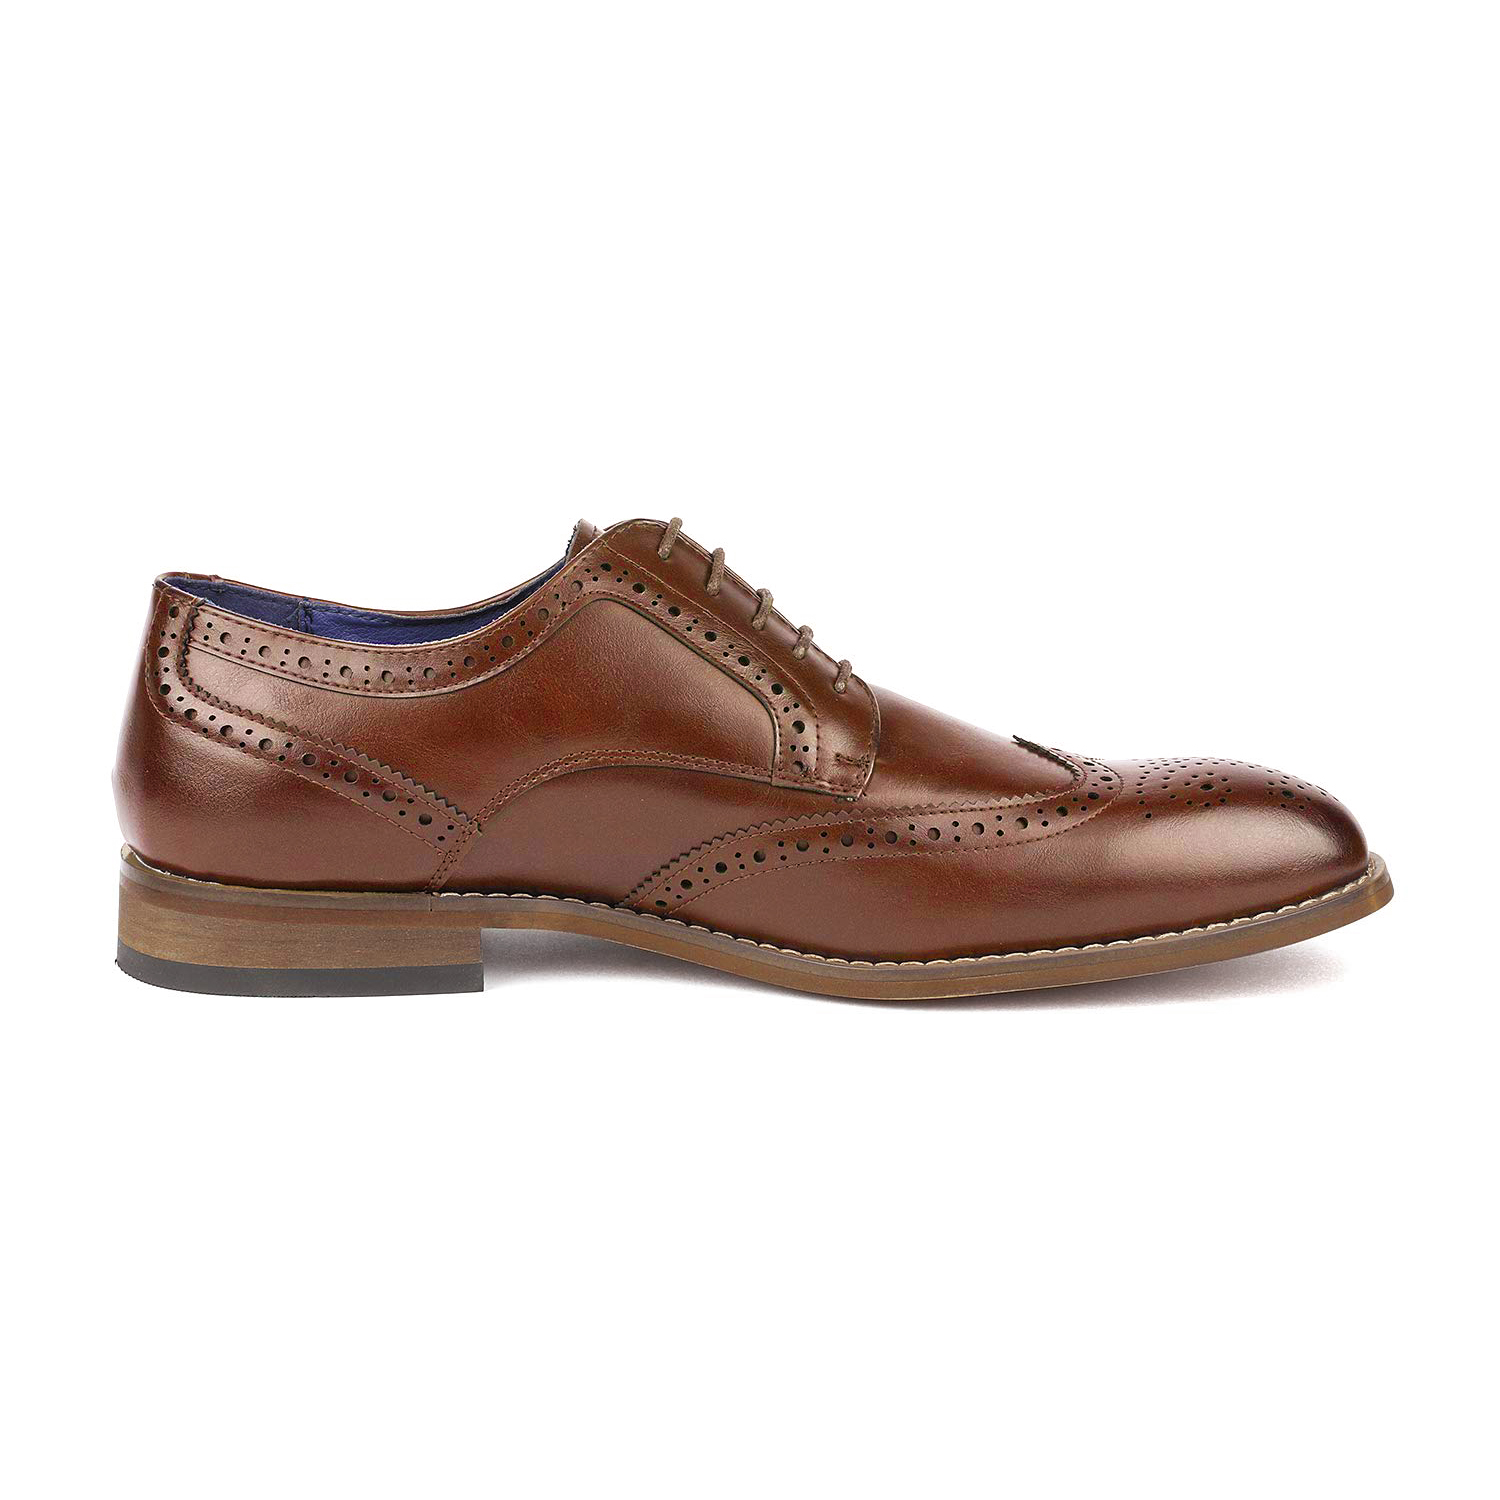 Bruno Marc Mens Brogue Oxford Shoes Lace up Wing Tip Dress Shoes Casual Shoes WILLIAM_2 BROWN Size 10.5 - image 2 of 5